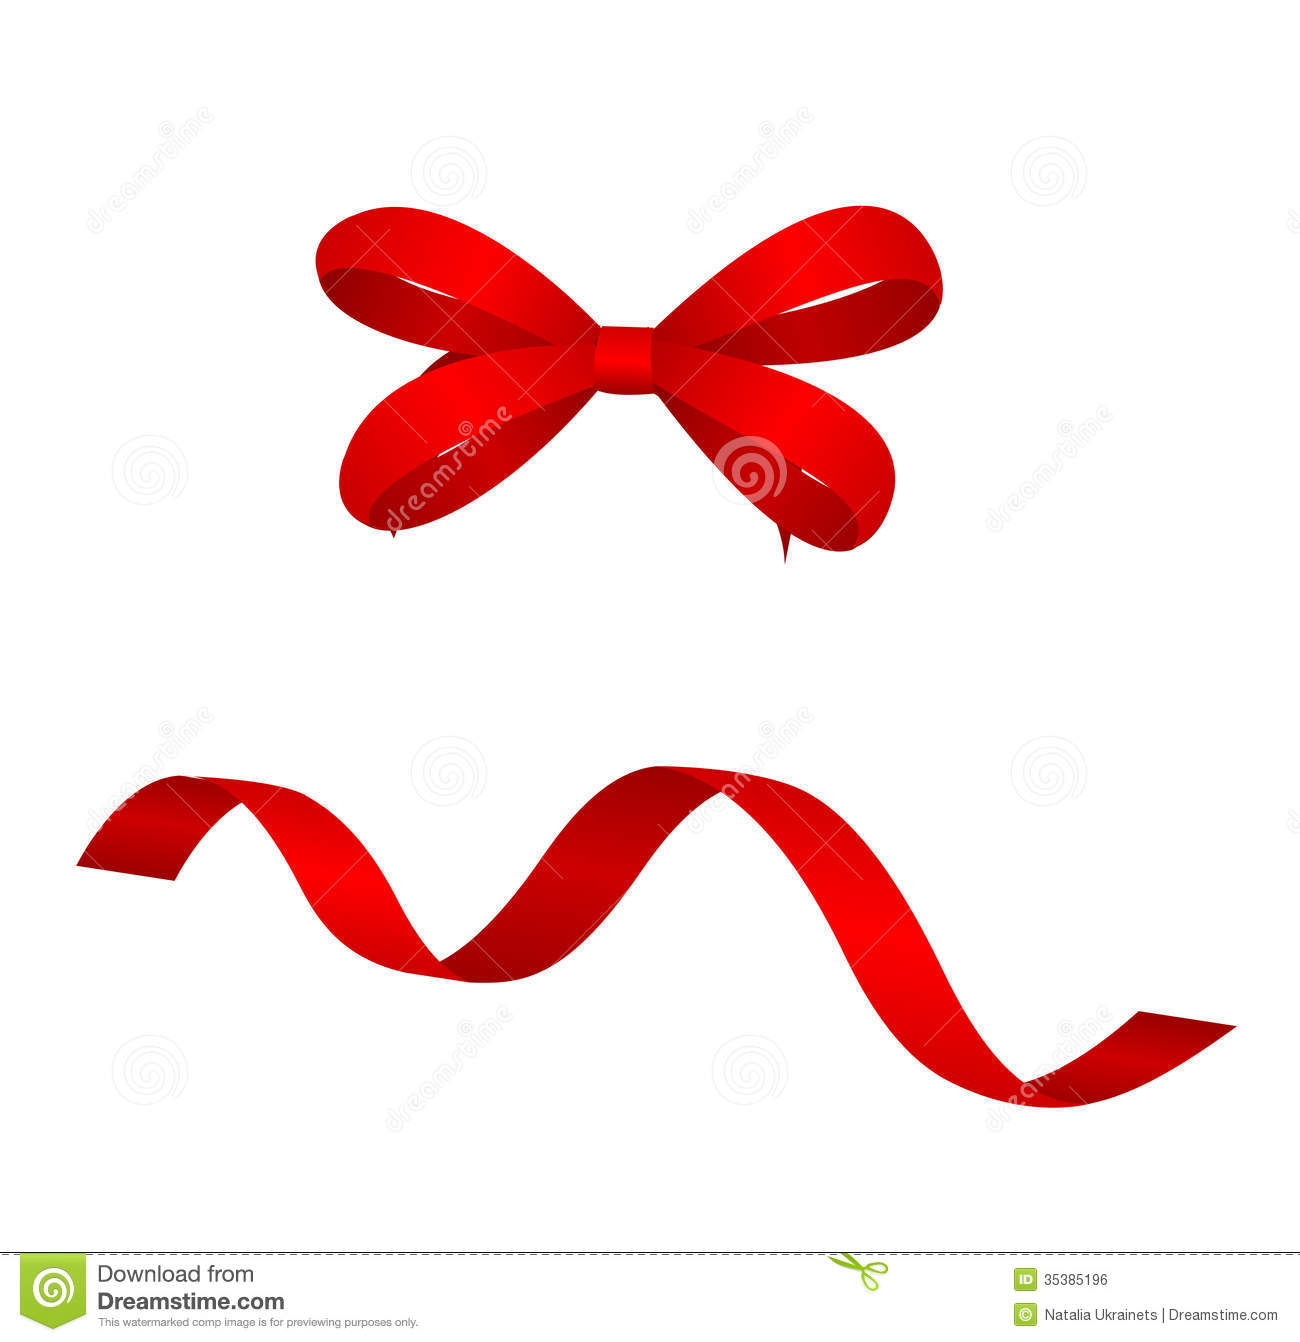 Red Ribbons And Bows Royalty Free Stock Image   Image  35385196